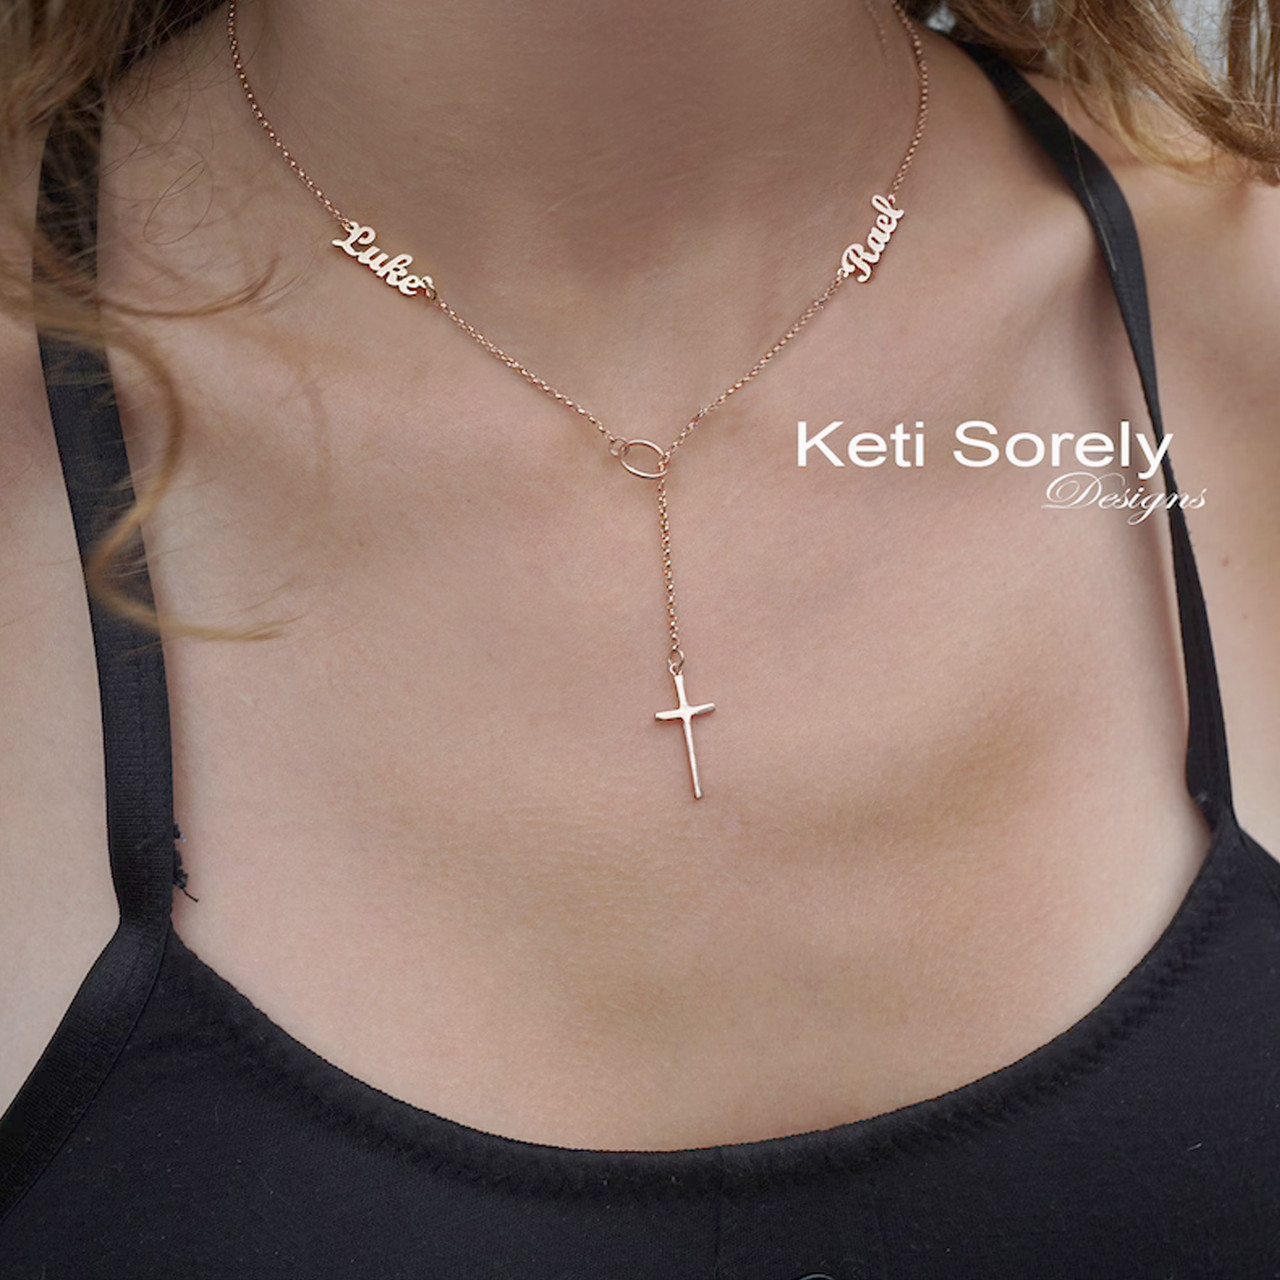 Women's Simple Small Cross Pendant Necklace (Silver, Rose Gold, and Black  Color) | eBay